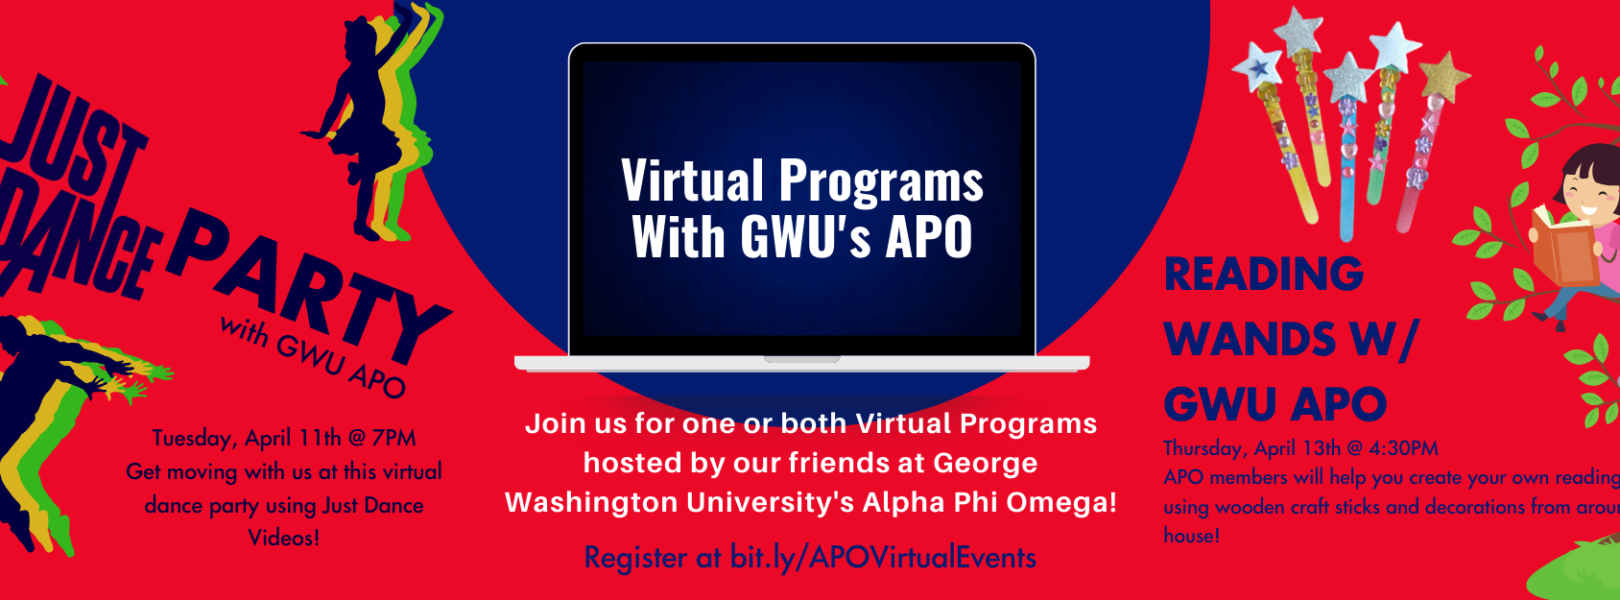 Virtual Programs with GWU's APO - Special Love